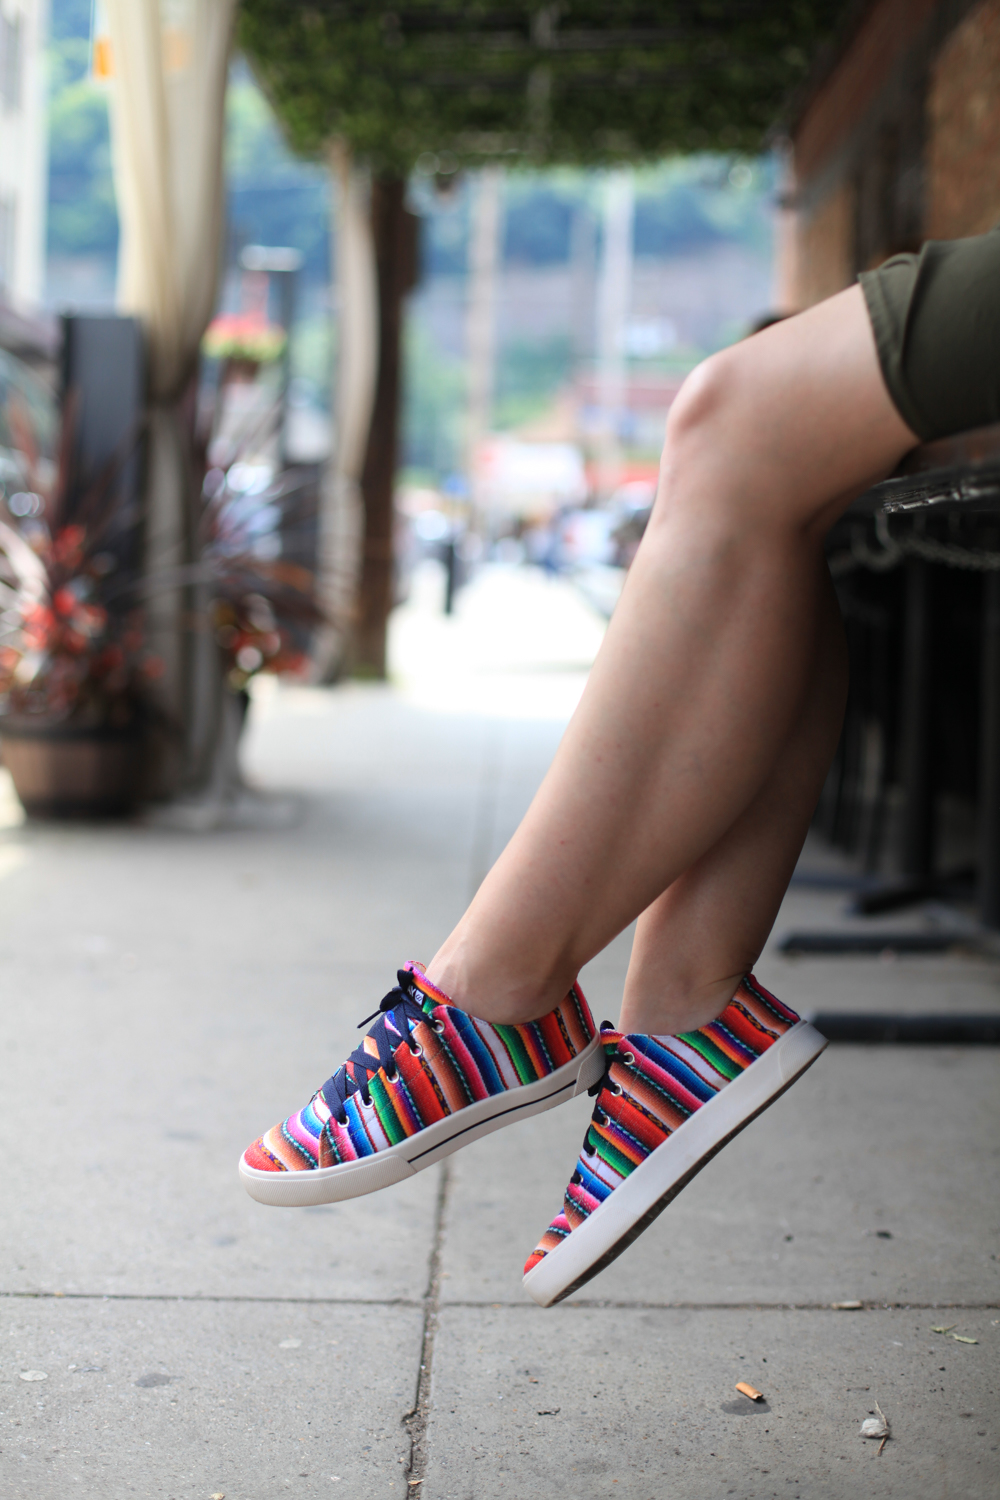 ISKAY handmade shoes are both comfortable and colorful.